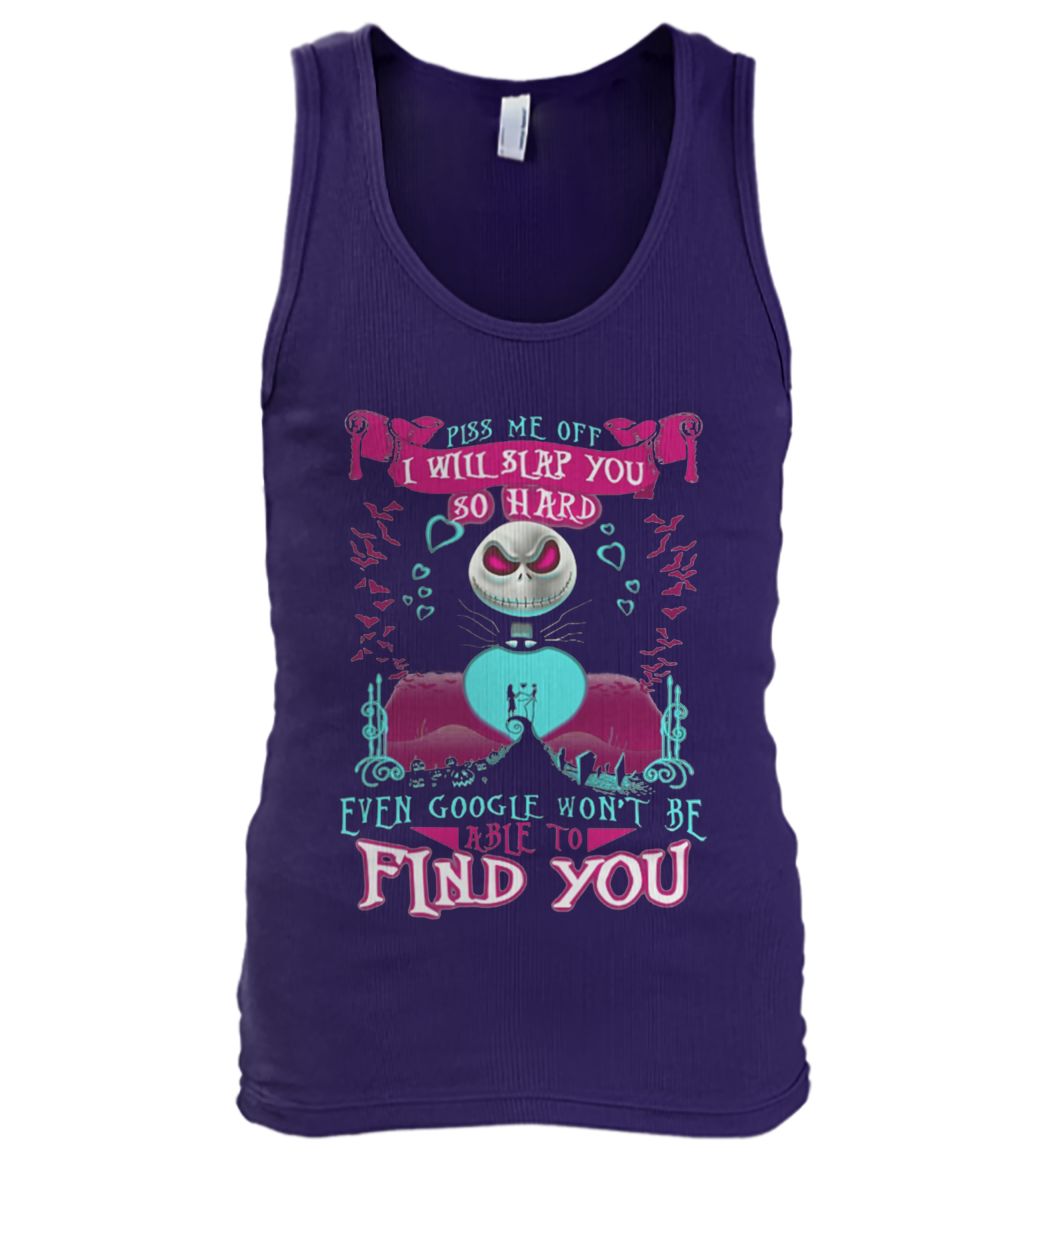 Jack skellington piss me off I will slap you so hard even google won't be able to find you men's tank top